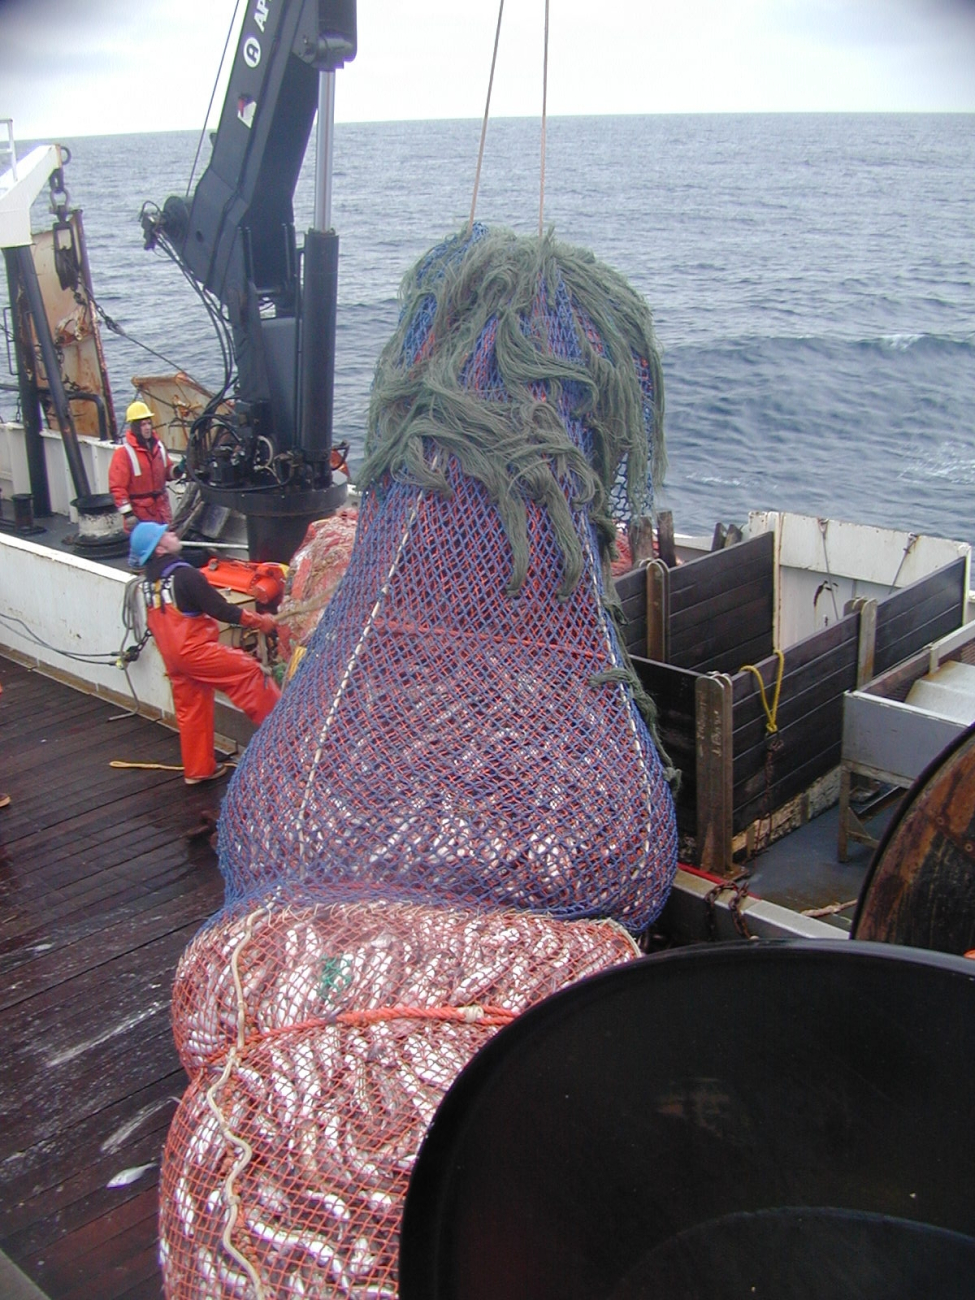 Cod end of the trawl net loaded with fish